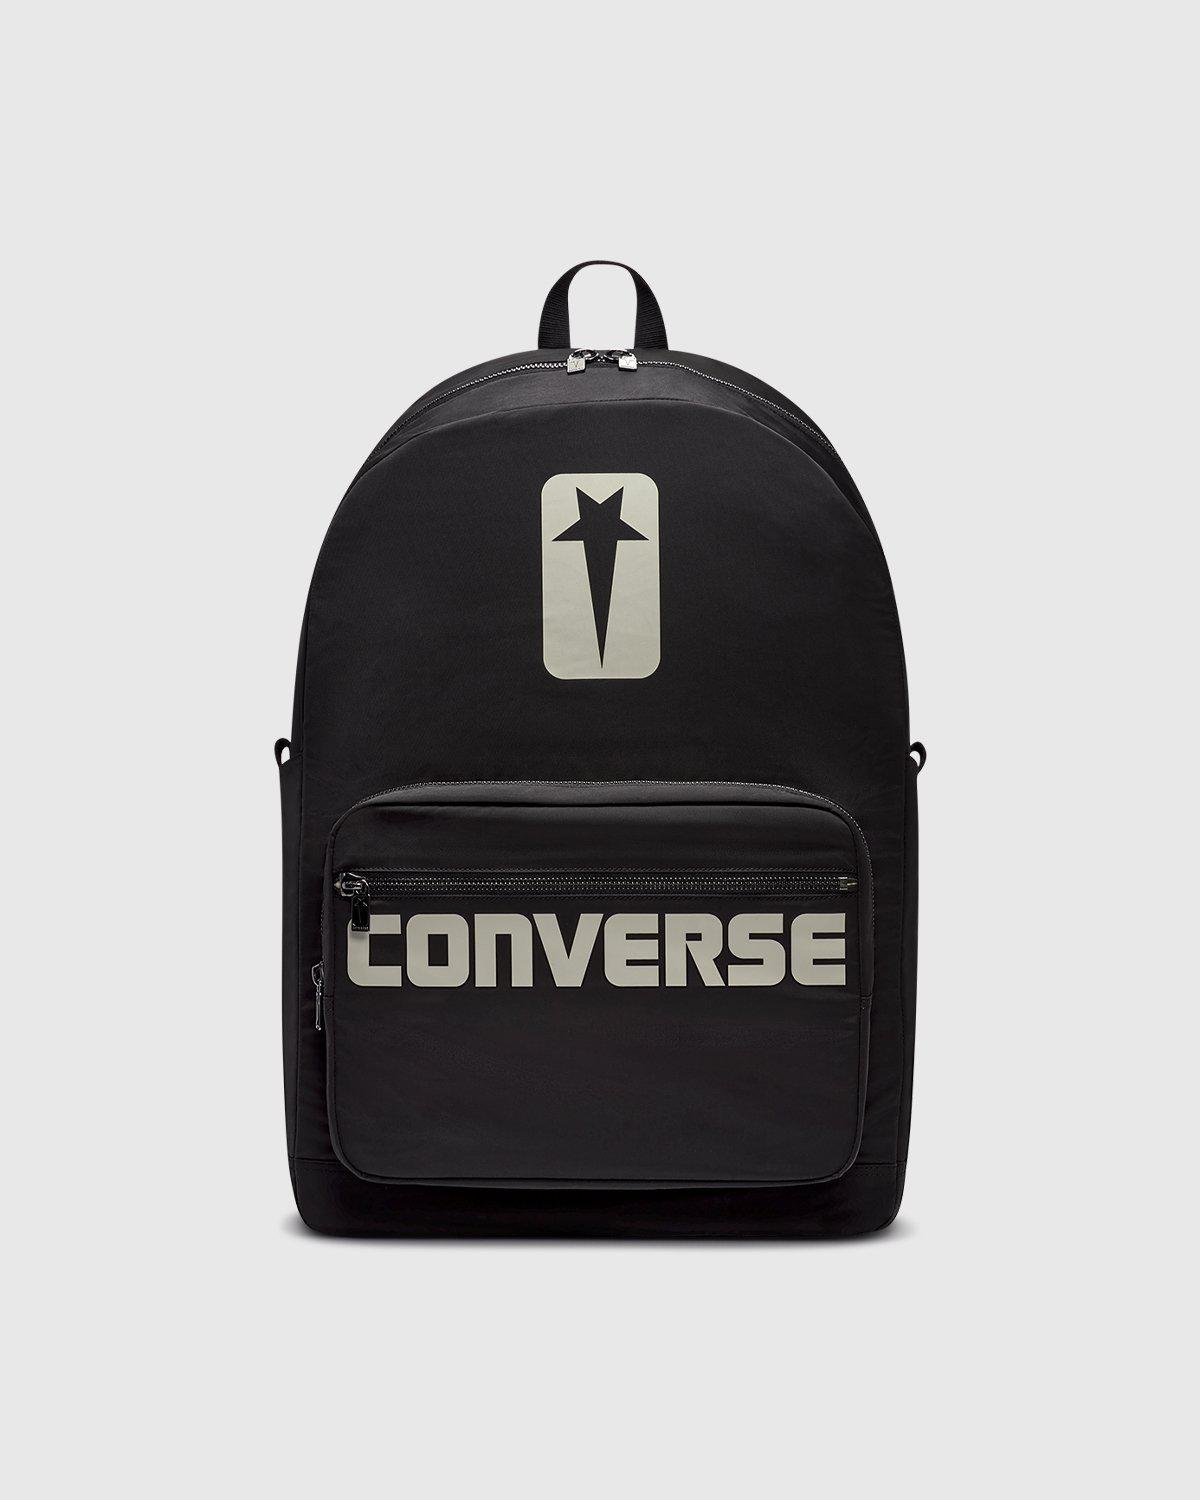 Converse x Rick Owens – Oversized Backpack Black by CONVERSE X RICK OWENS